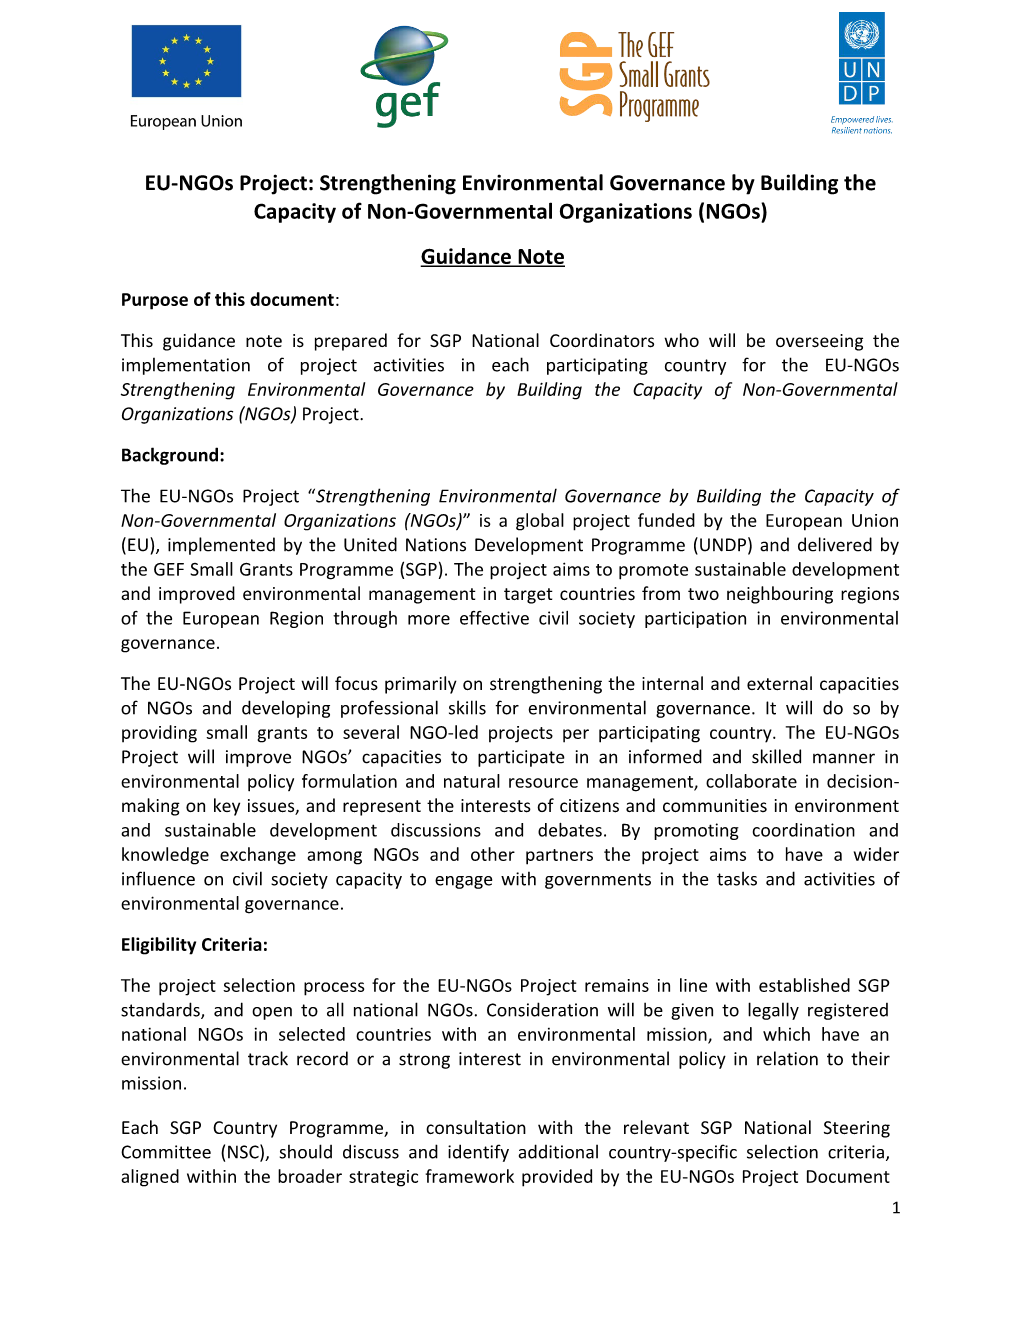 EU-Ngos Project: Strengthening Environmental Governance by Building the Capacity Of